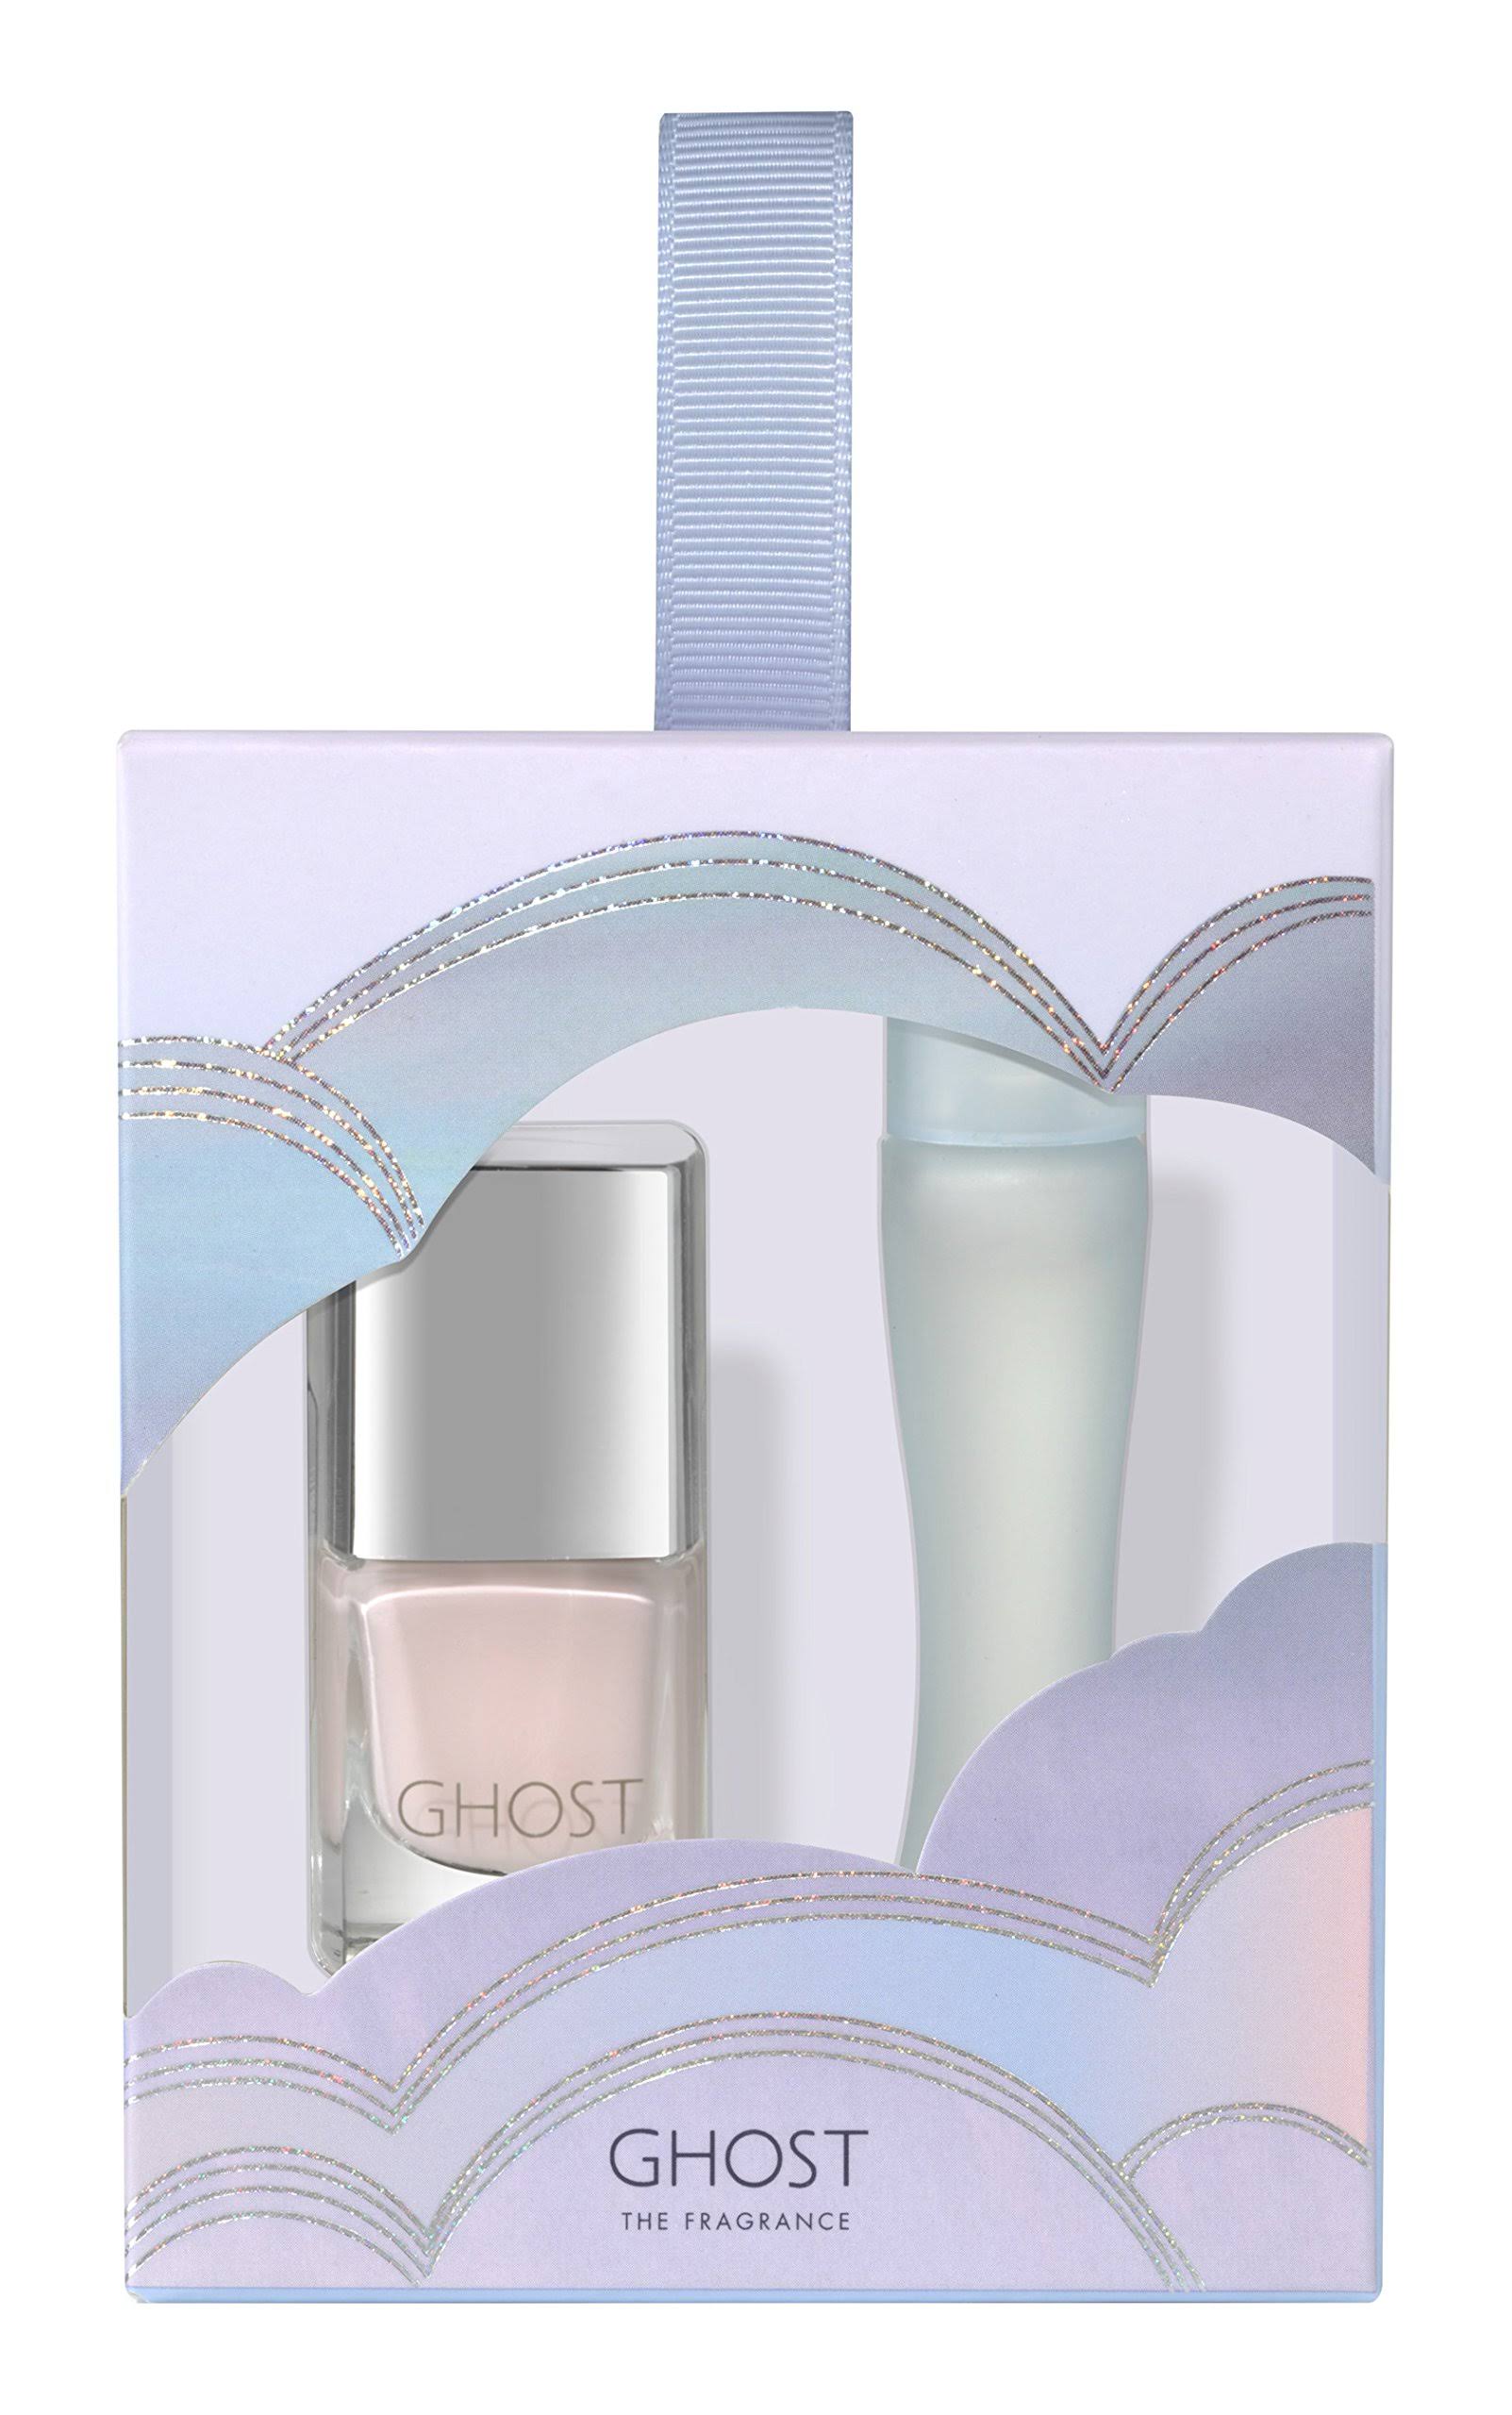 GHOST The Fragrance 5ml Miniature Gift Set